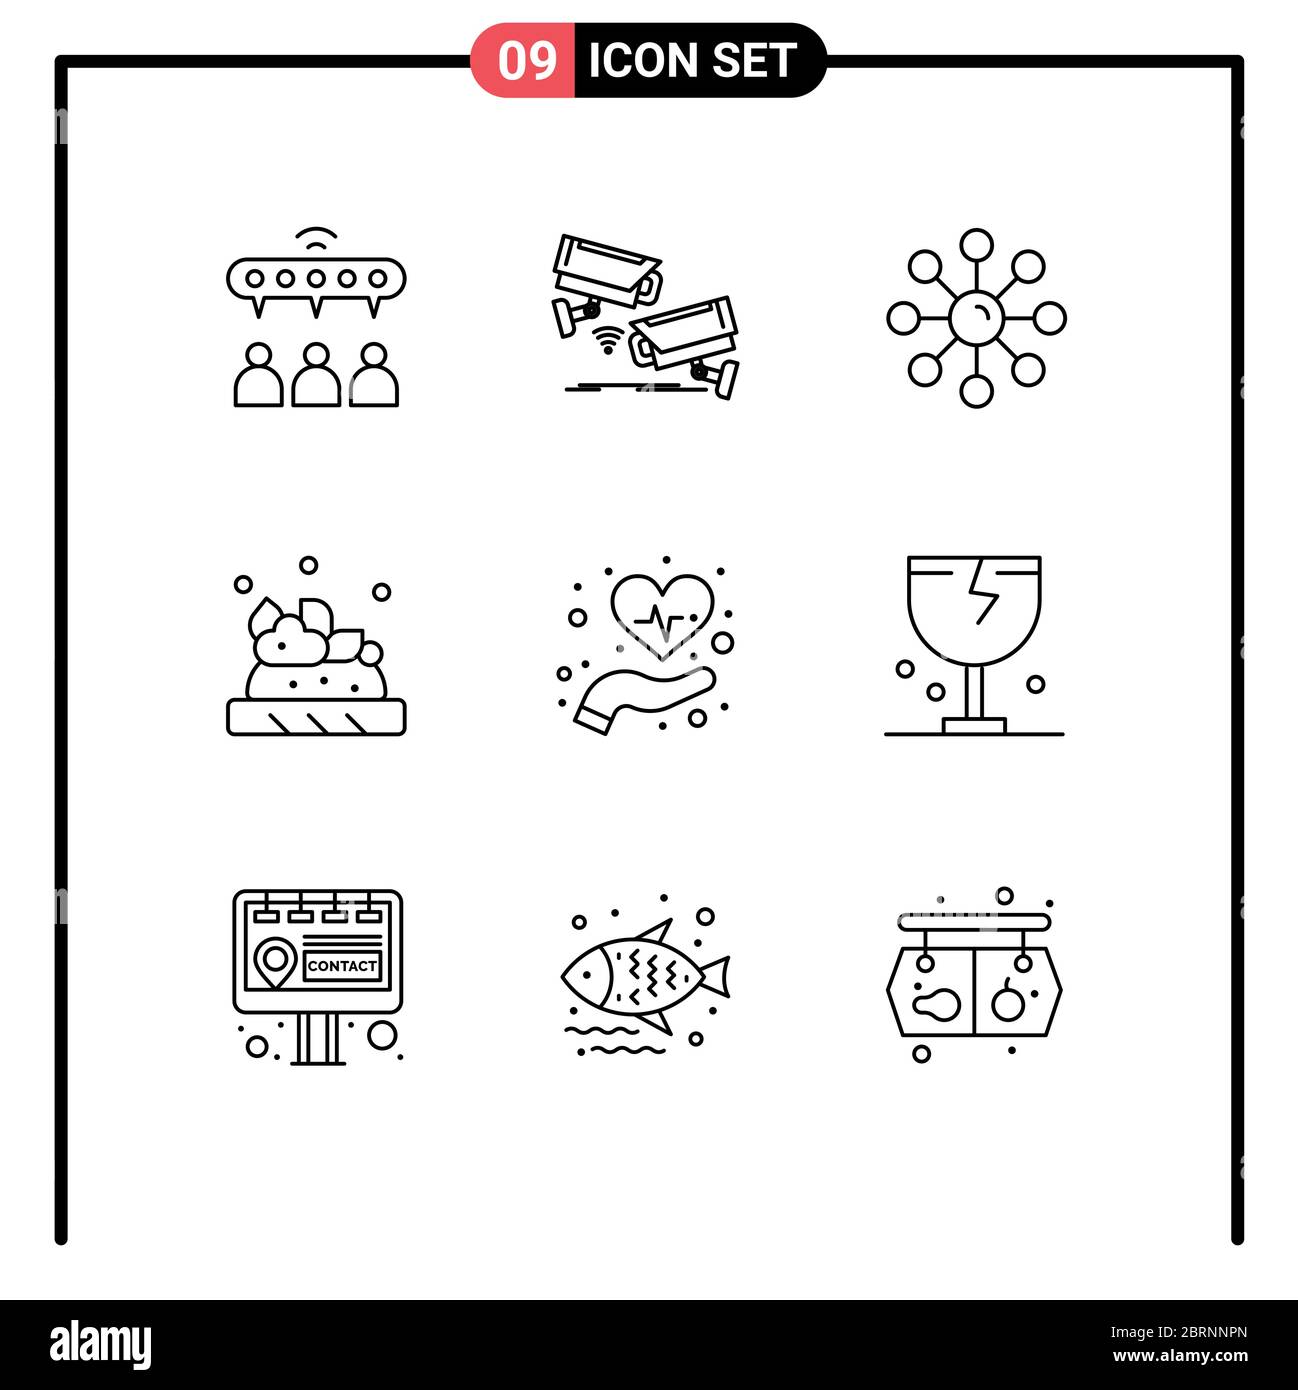 Set of 9 Modern UI Icons Symbols Signs for care, food, technology, bruschetta, skin Editable Vector Design Elements Stock Vector